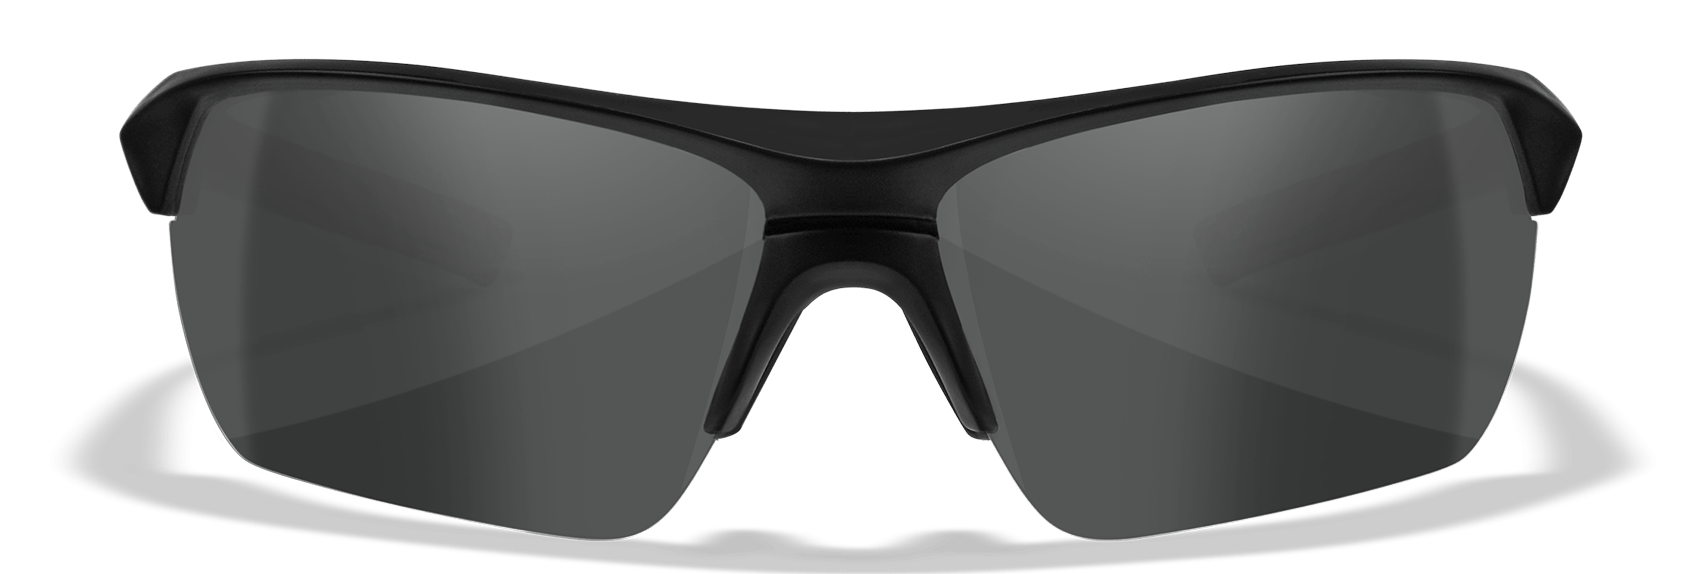 Wiley X Guard Advanced Safety Glasses Front View